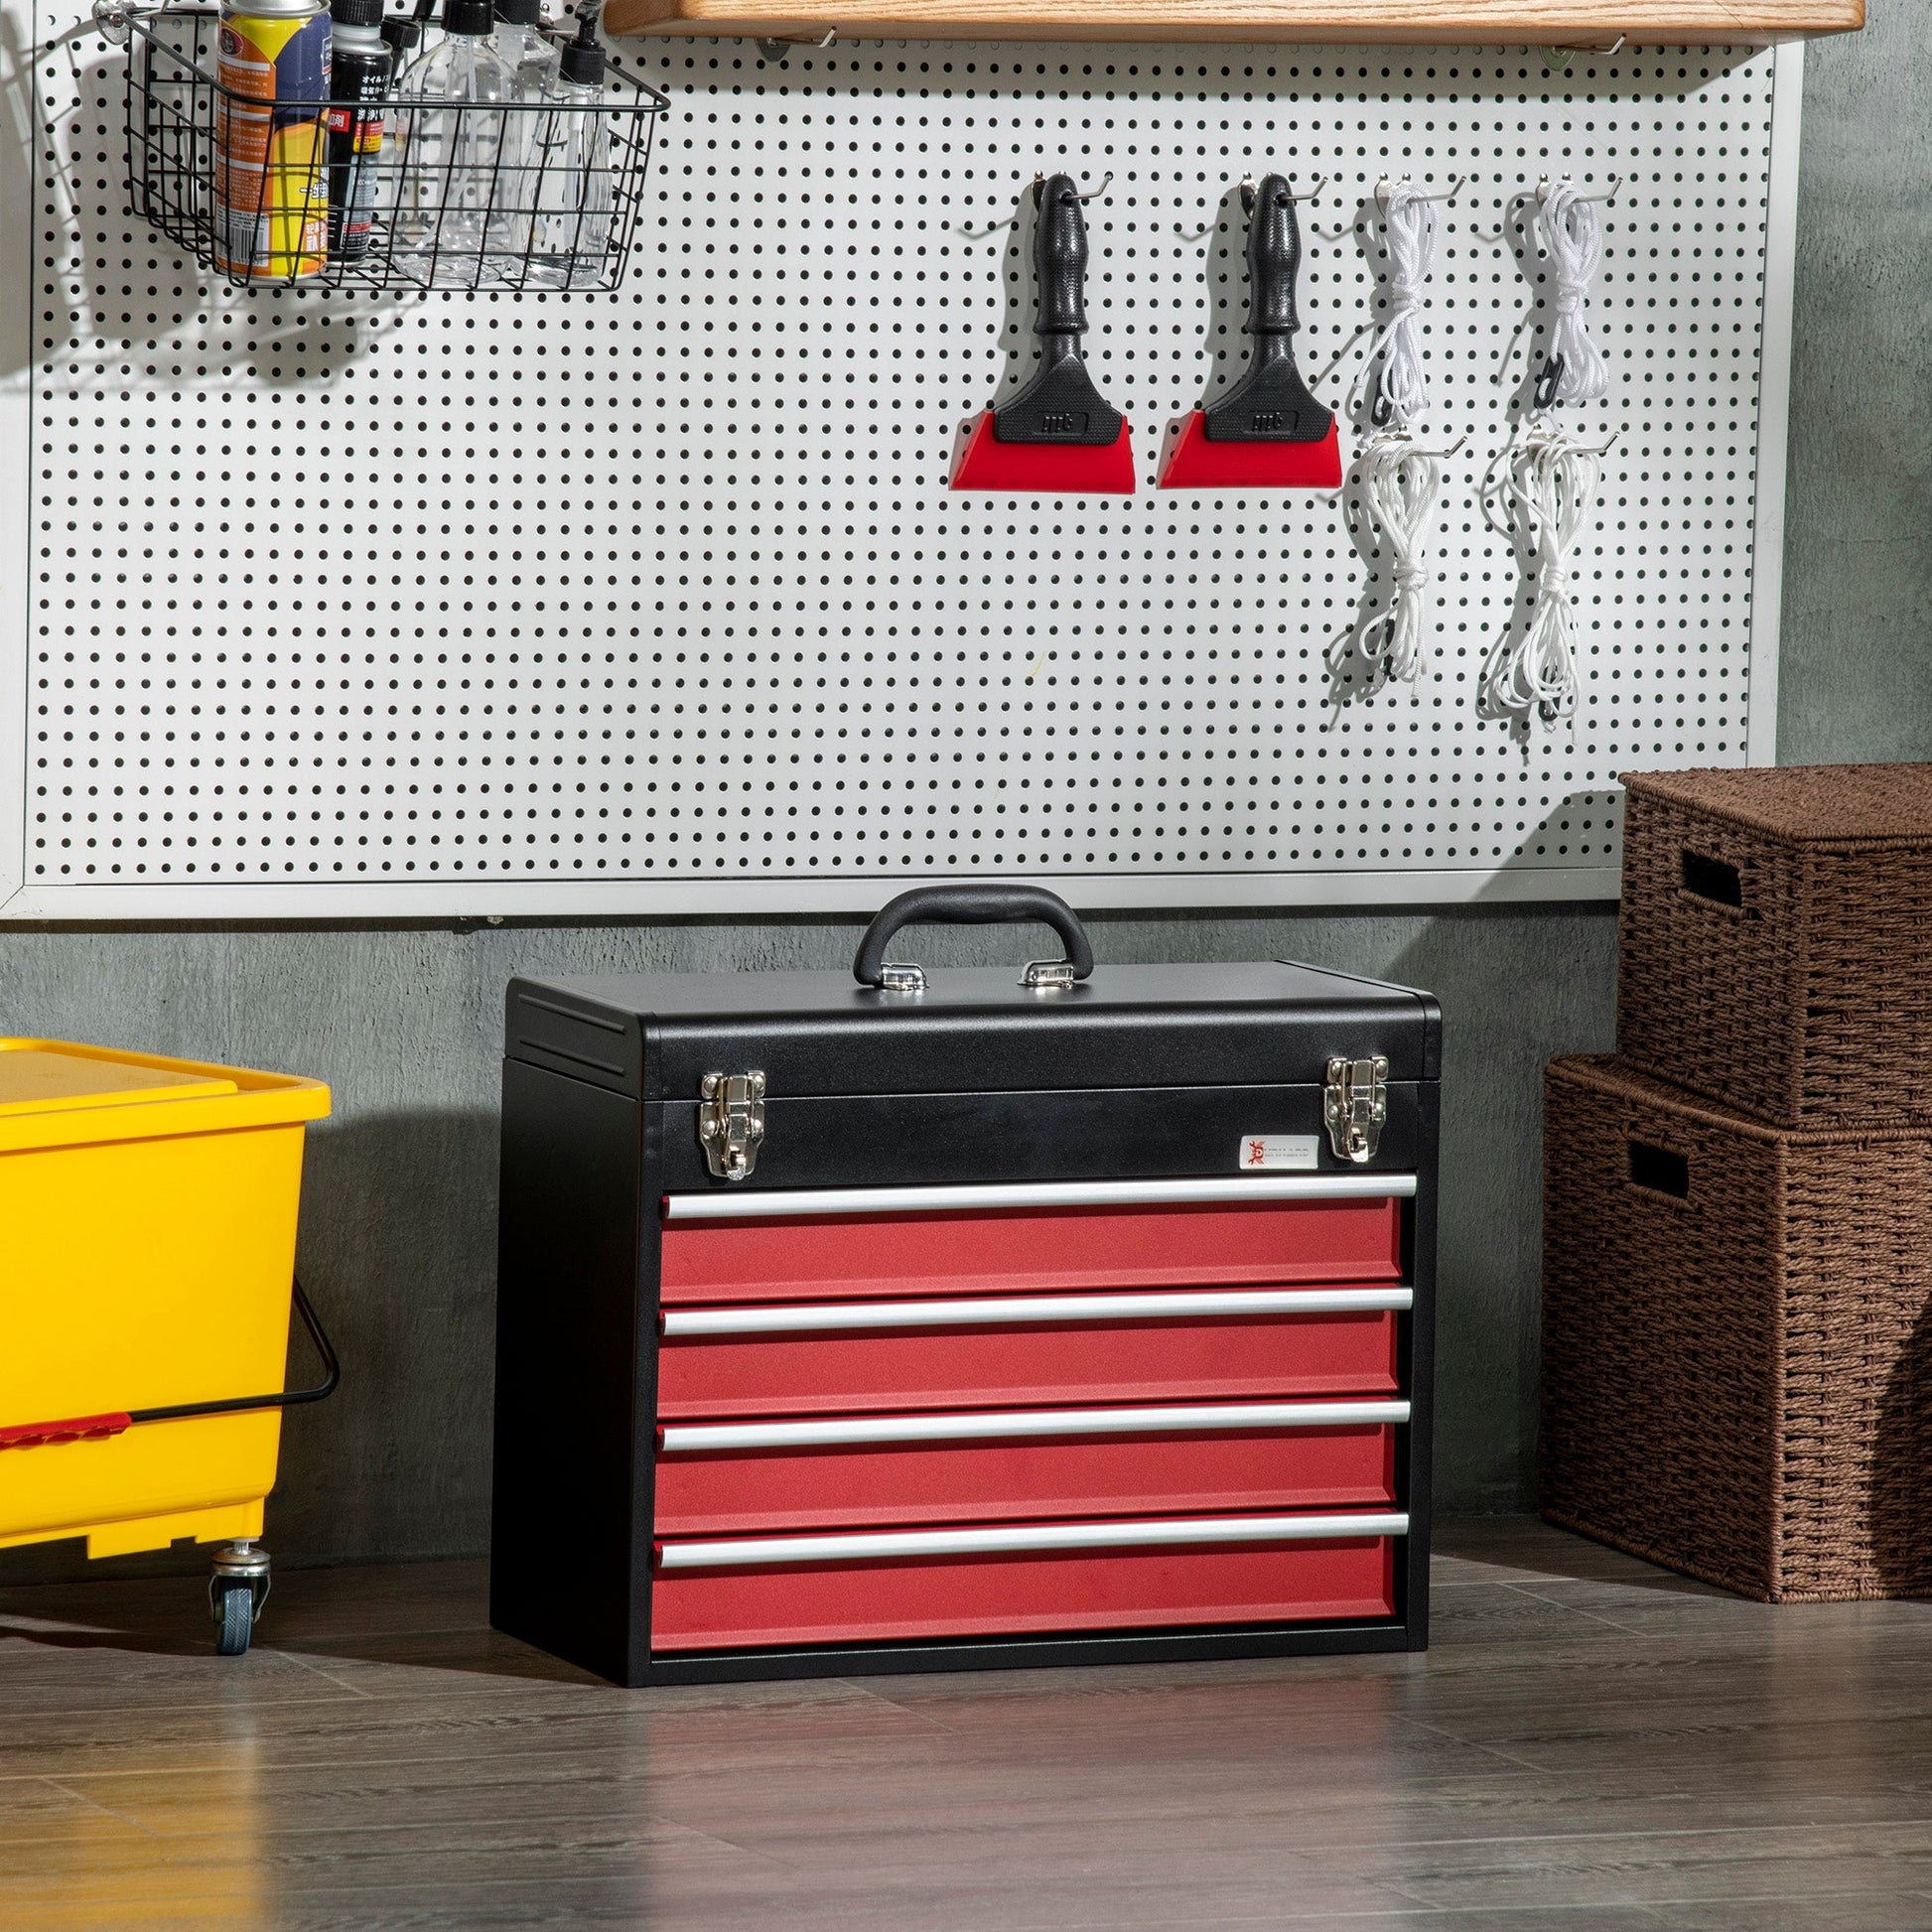 15.6" Tall Portable Metal Tool Box with Metal Latch Closure, 4 Drawer Tool Chest with Ball-bearing Slider for Garage, Household and Warehouse, Red at Gallery Canada